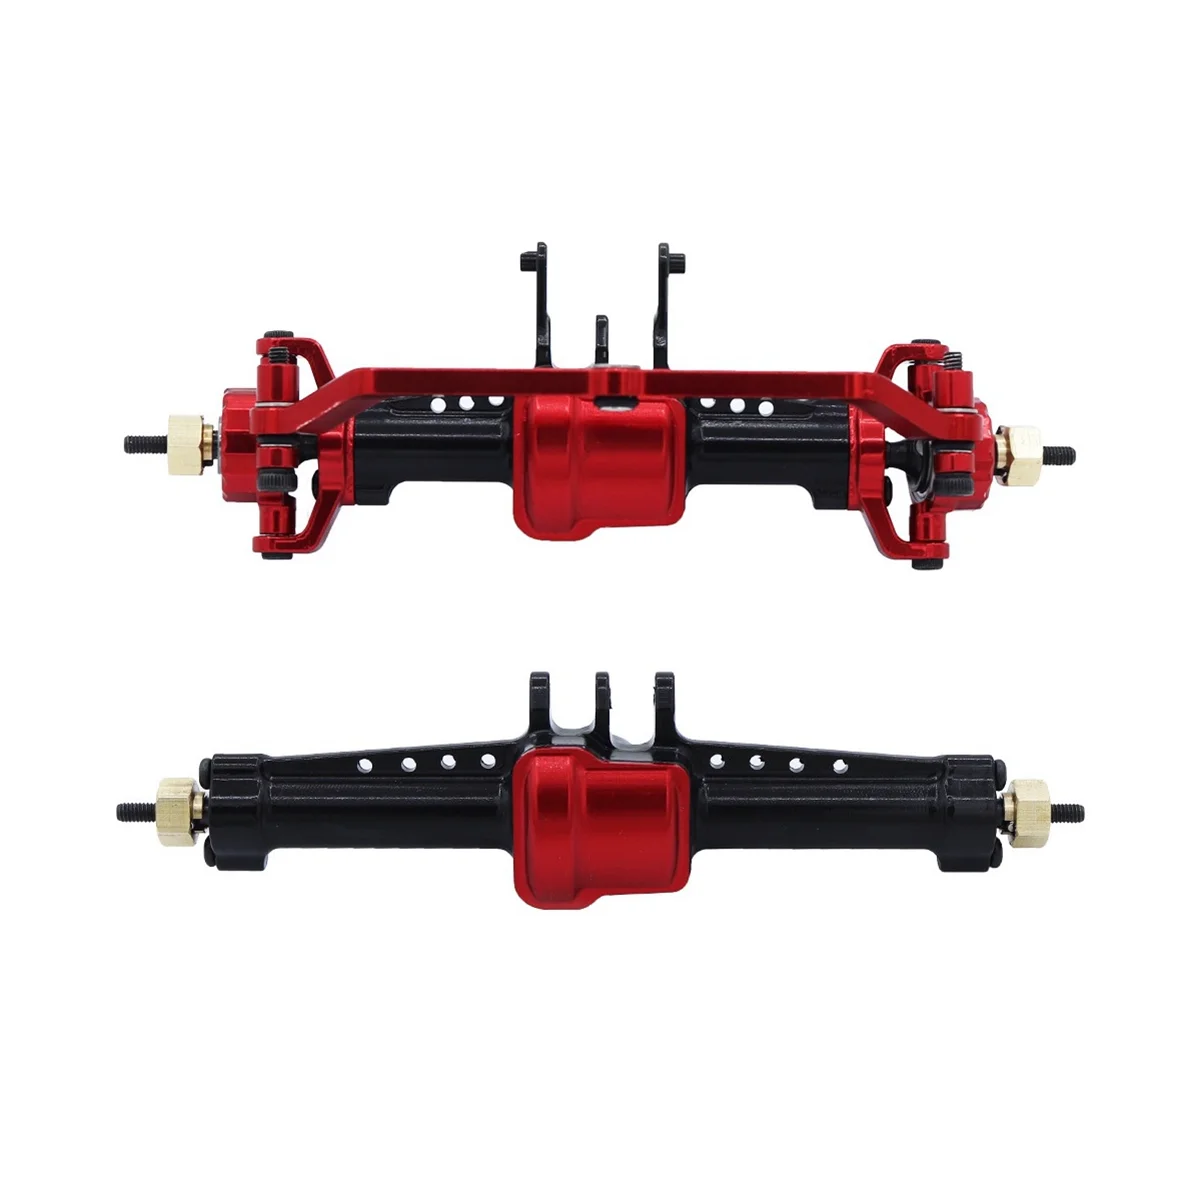 

2Pcs Metal Front and Rear Axle with Steel Gear for Traxxas TRX4M Bronco Defender 1/18 RC Crawler Car Upgrade Parts,1